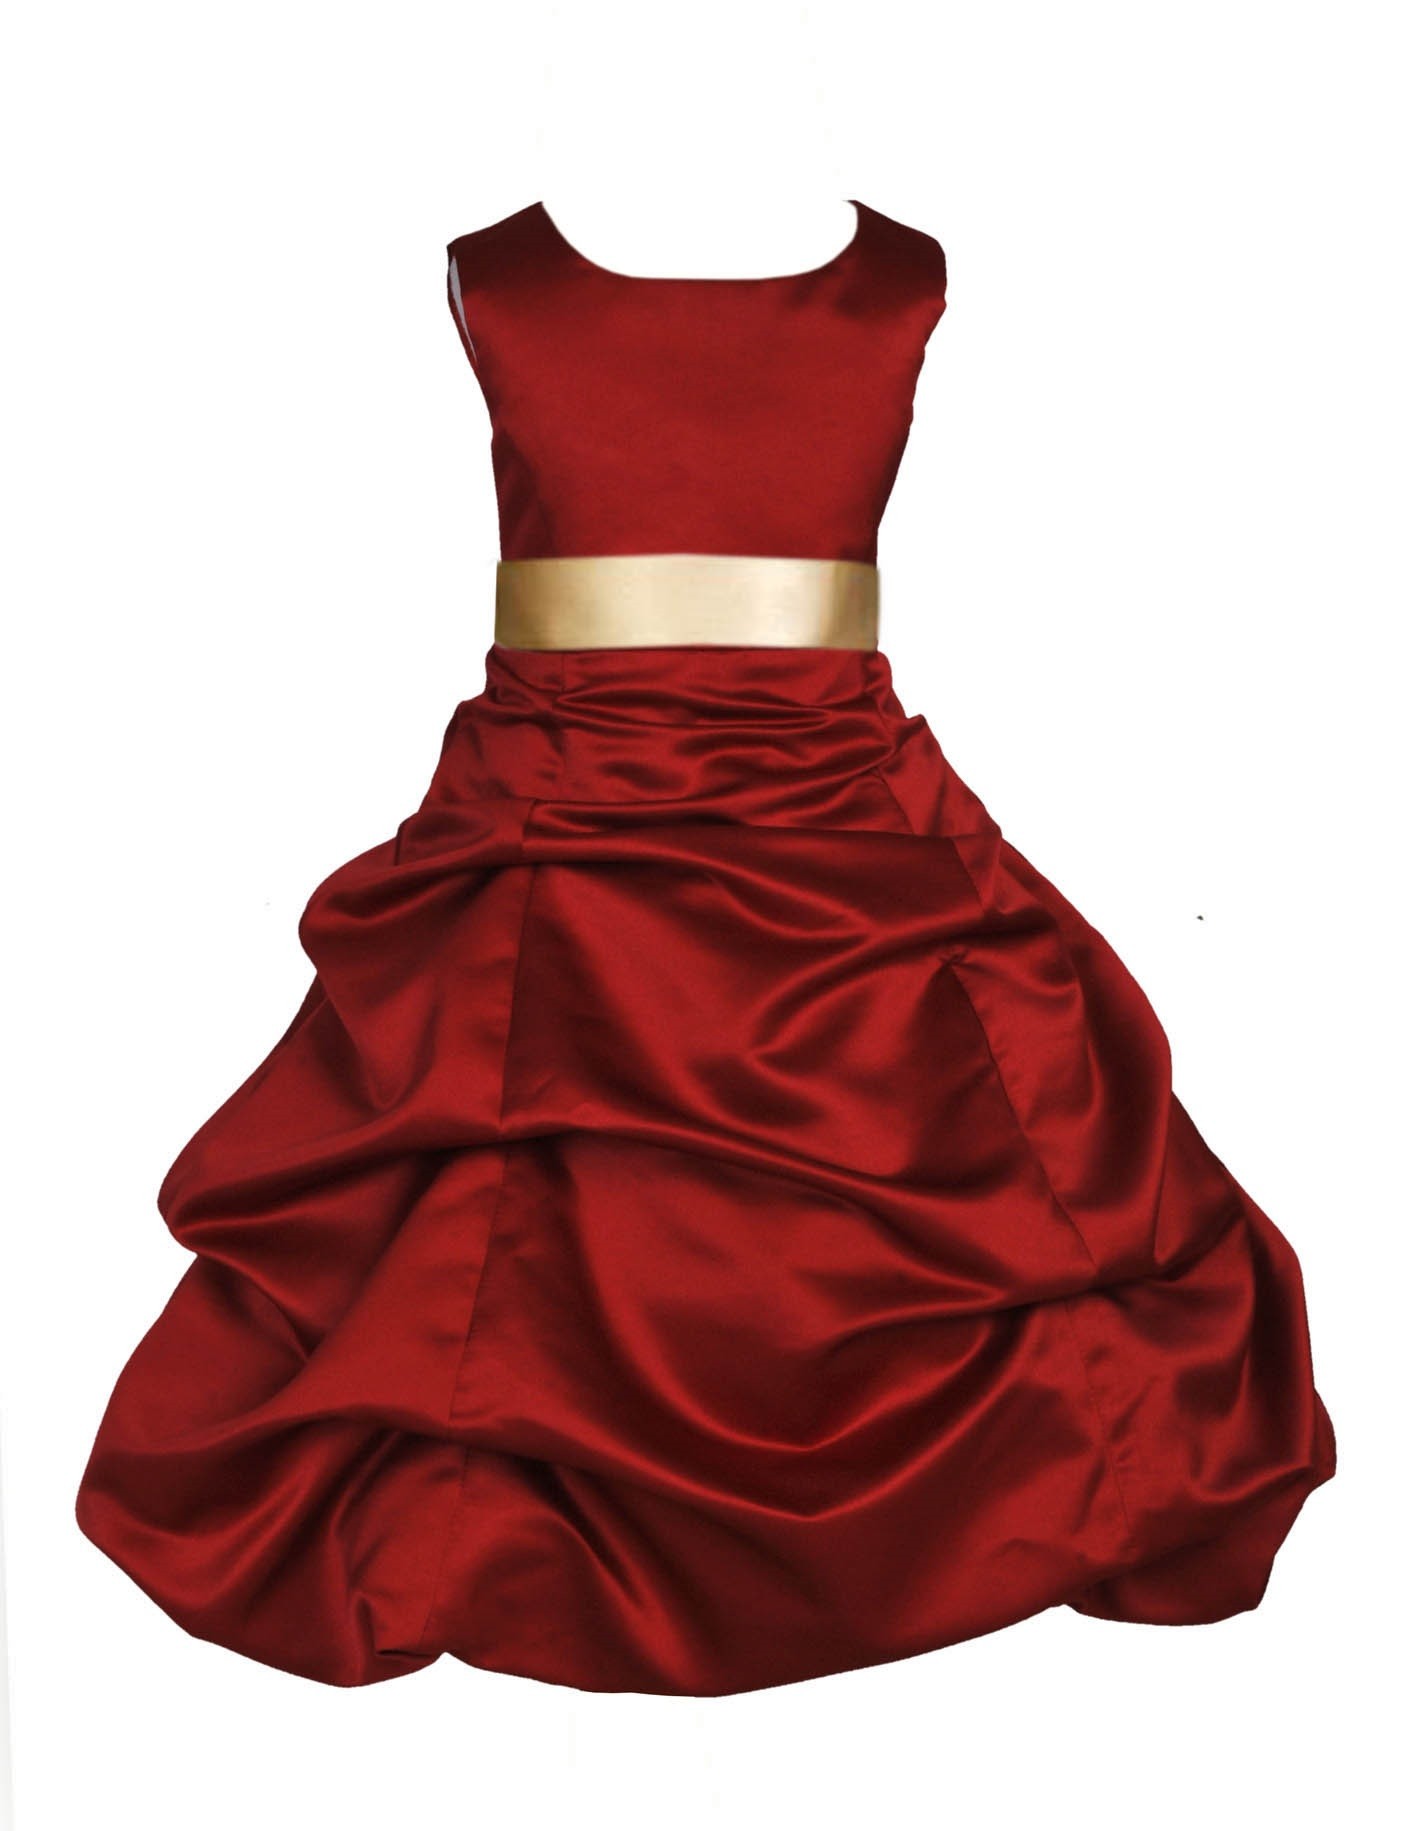 red and gold outfits for ladies